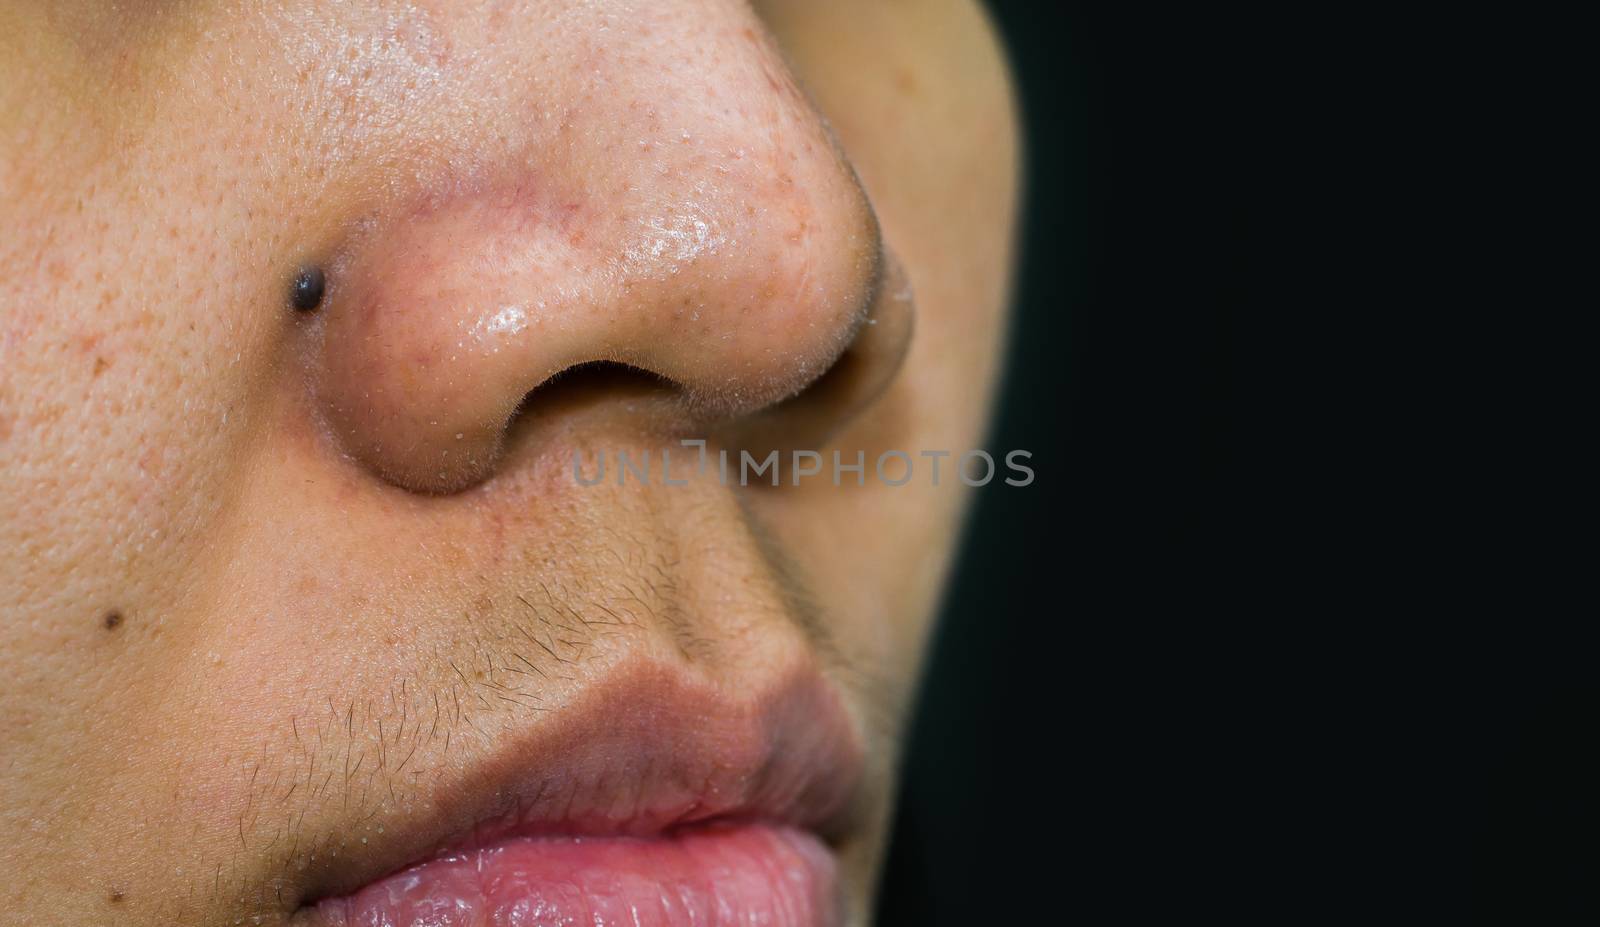 Black mole behind nose need CO2 Laser to removal. Blackheads acne on Asian woman nose. Comedones and large pores skin need AHA, BHA or benzoyl peroxide. Excess male hormone cause of female mustache. by Fahroni